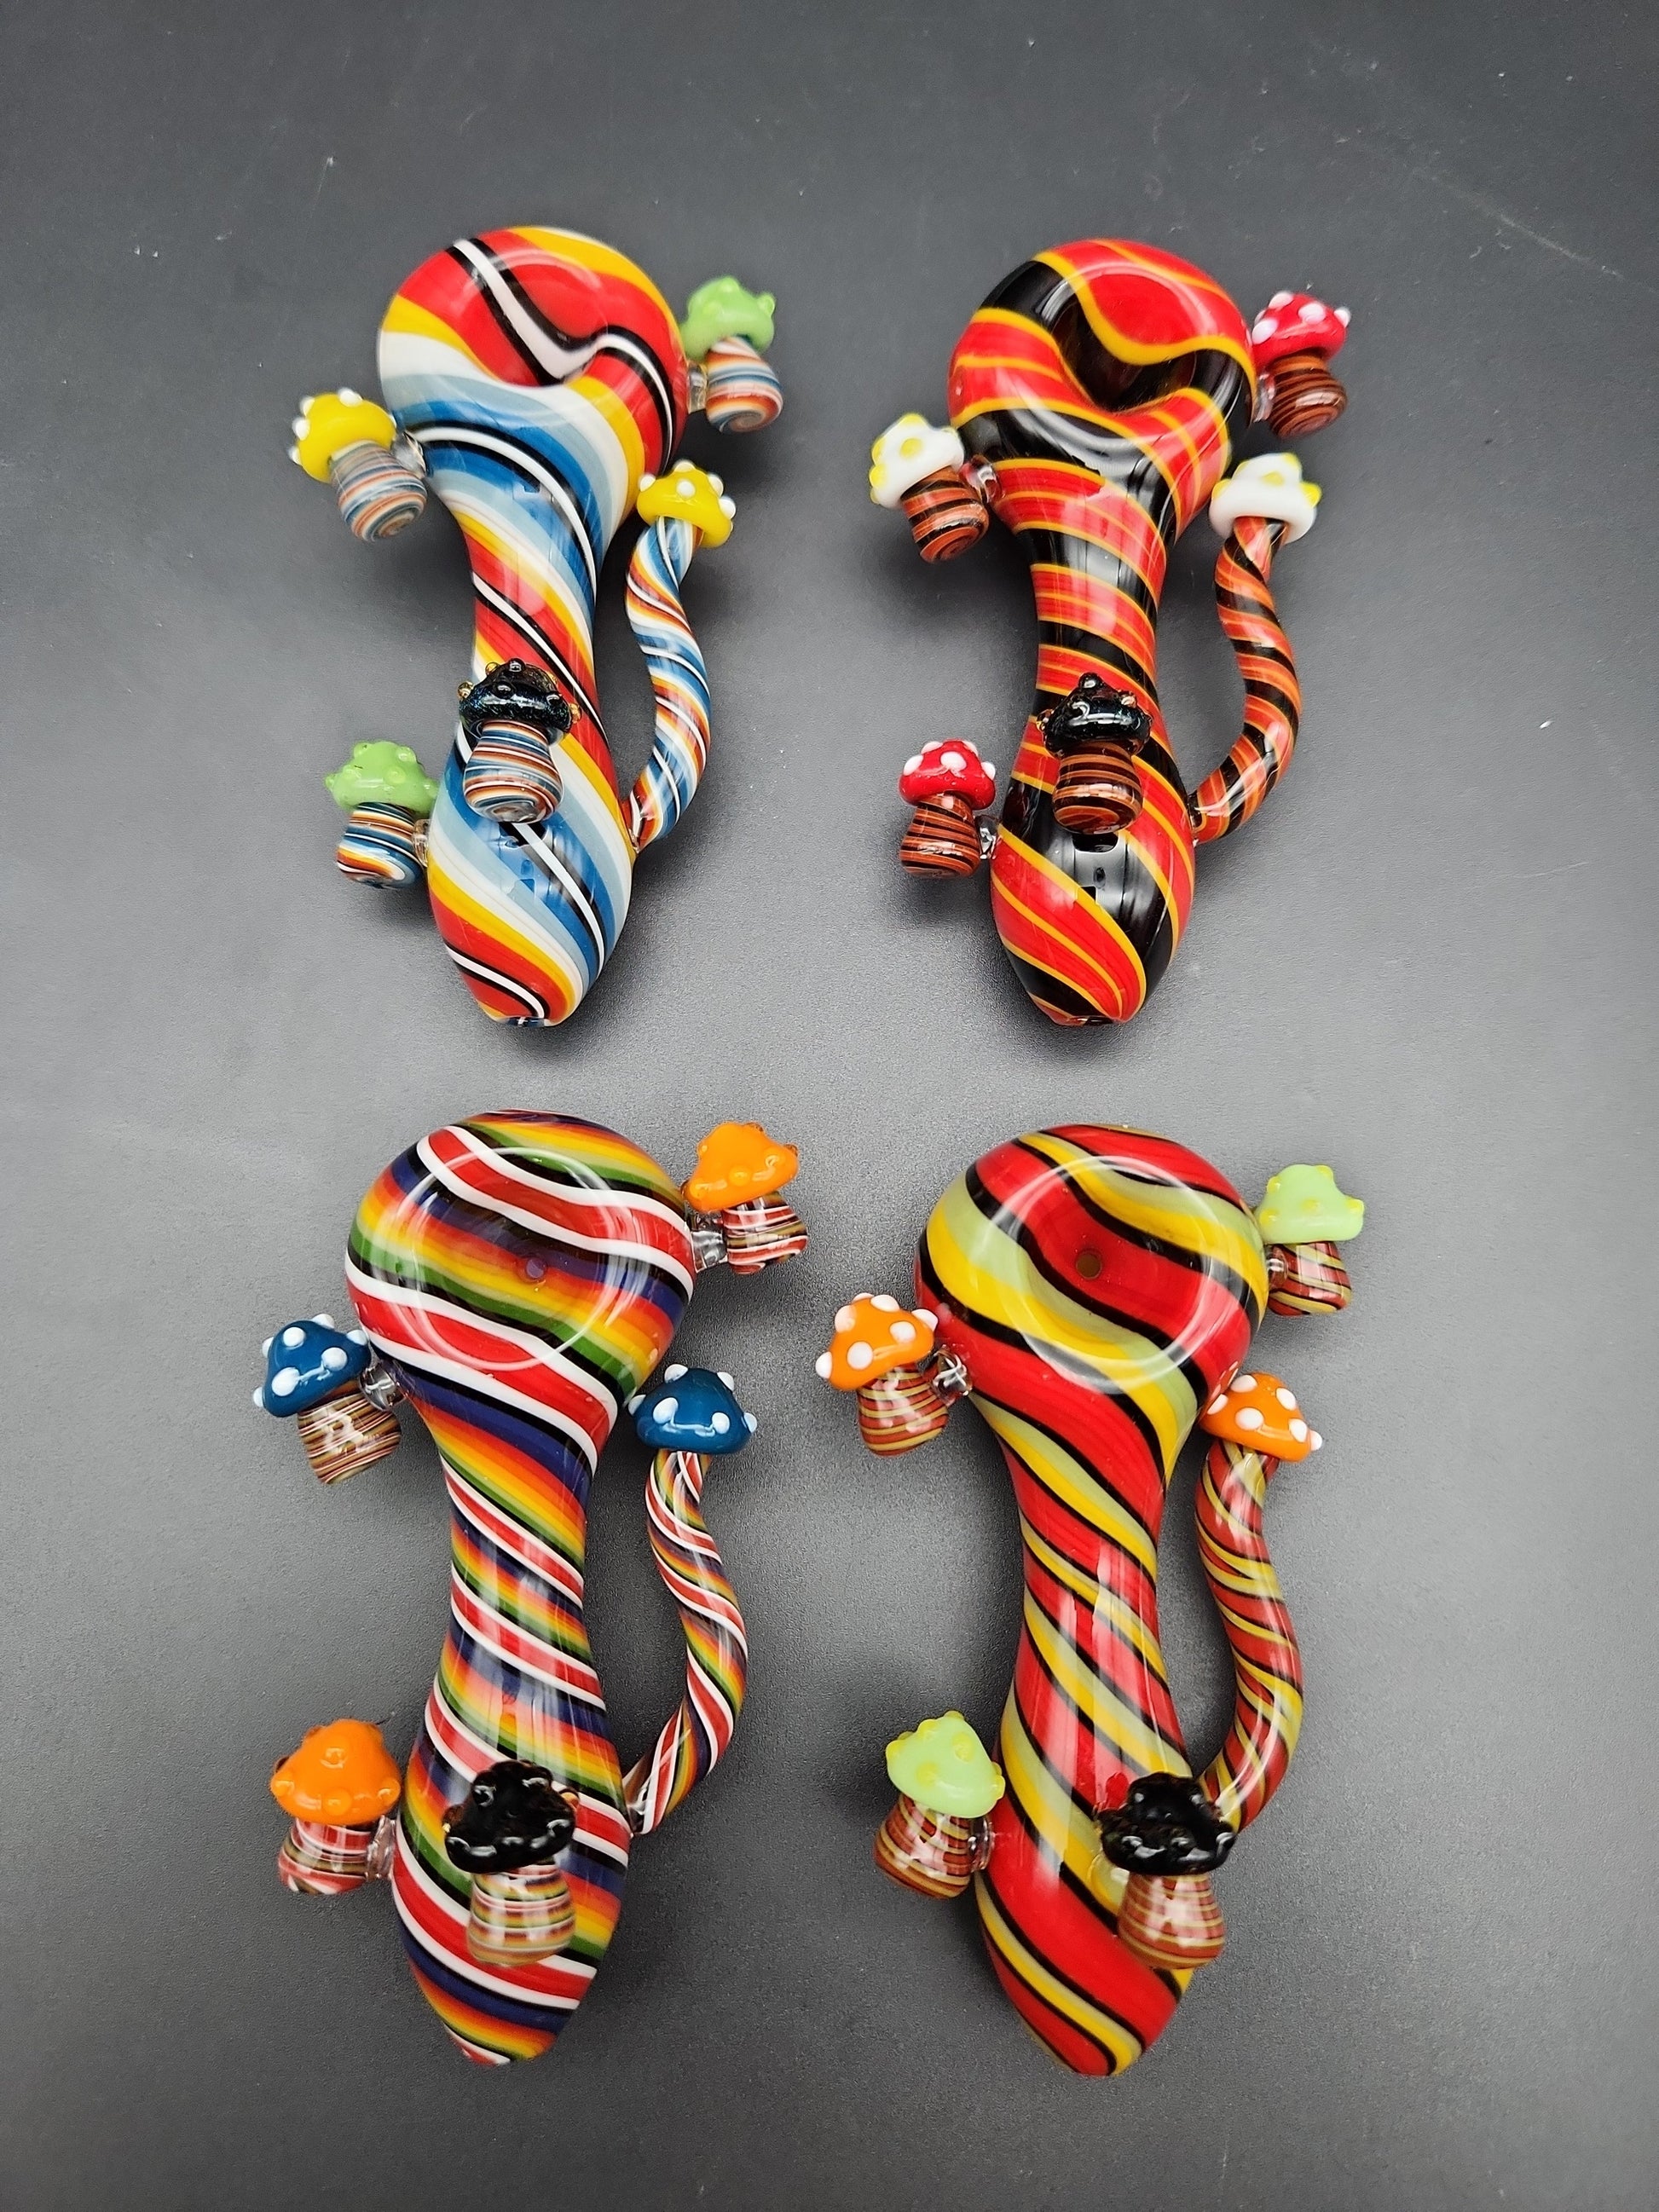 4" Color Spiral Mushroom Spoon Pipes